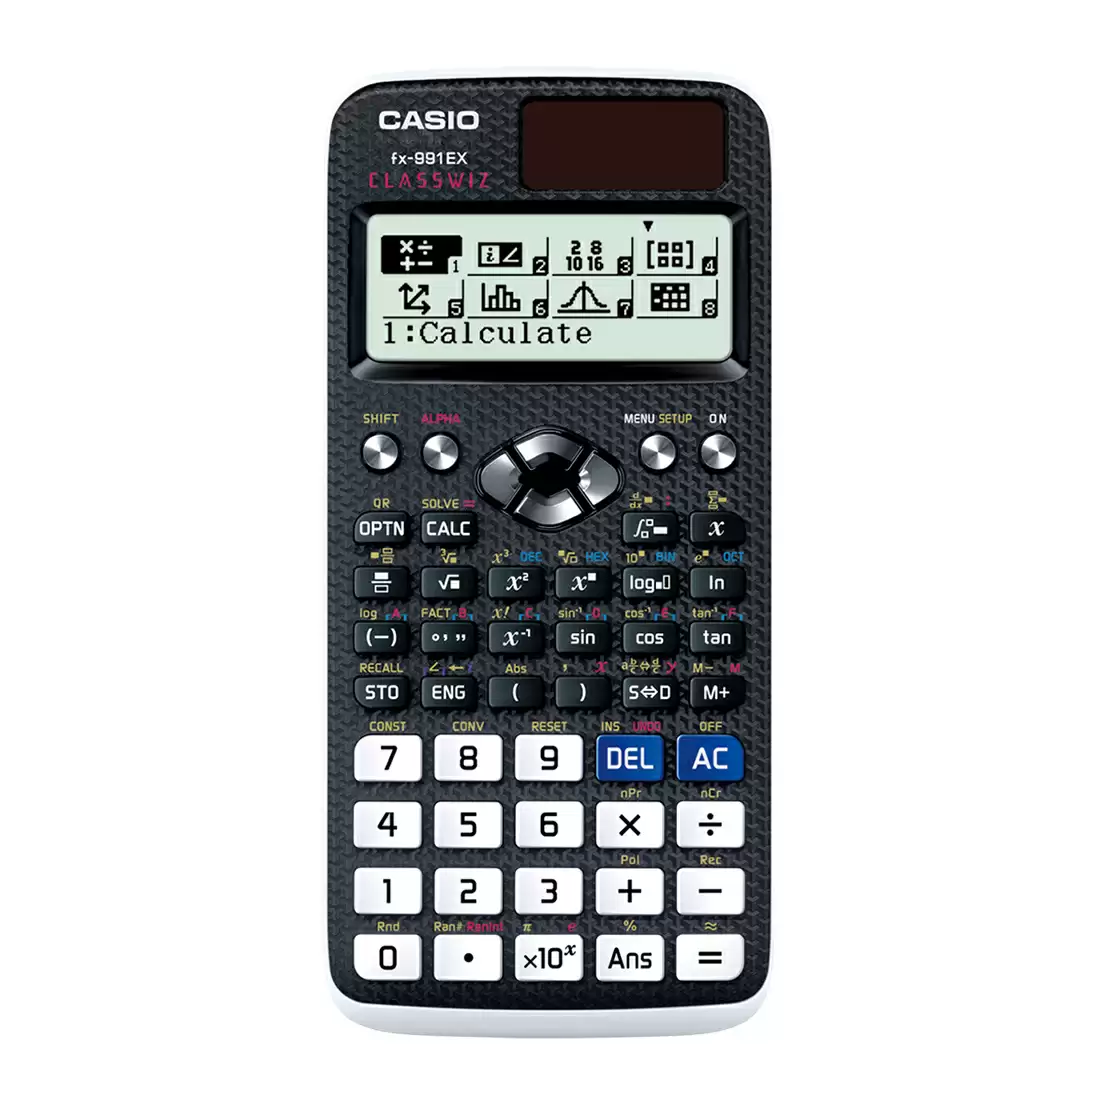 Three best Calculators from Casio to Check Out | by Crystalarc Lifestyle |  Medium